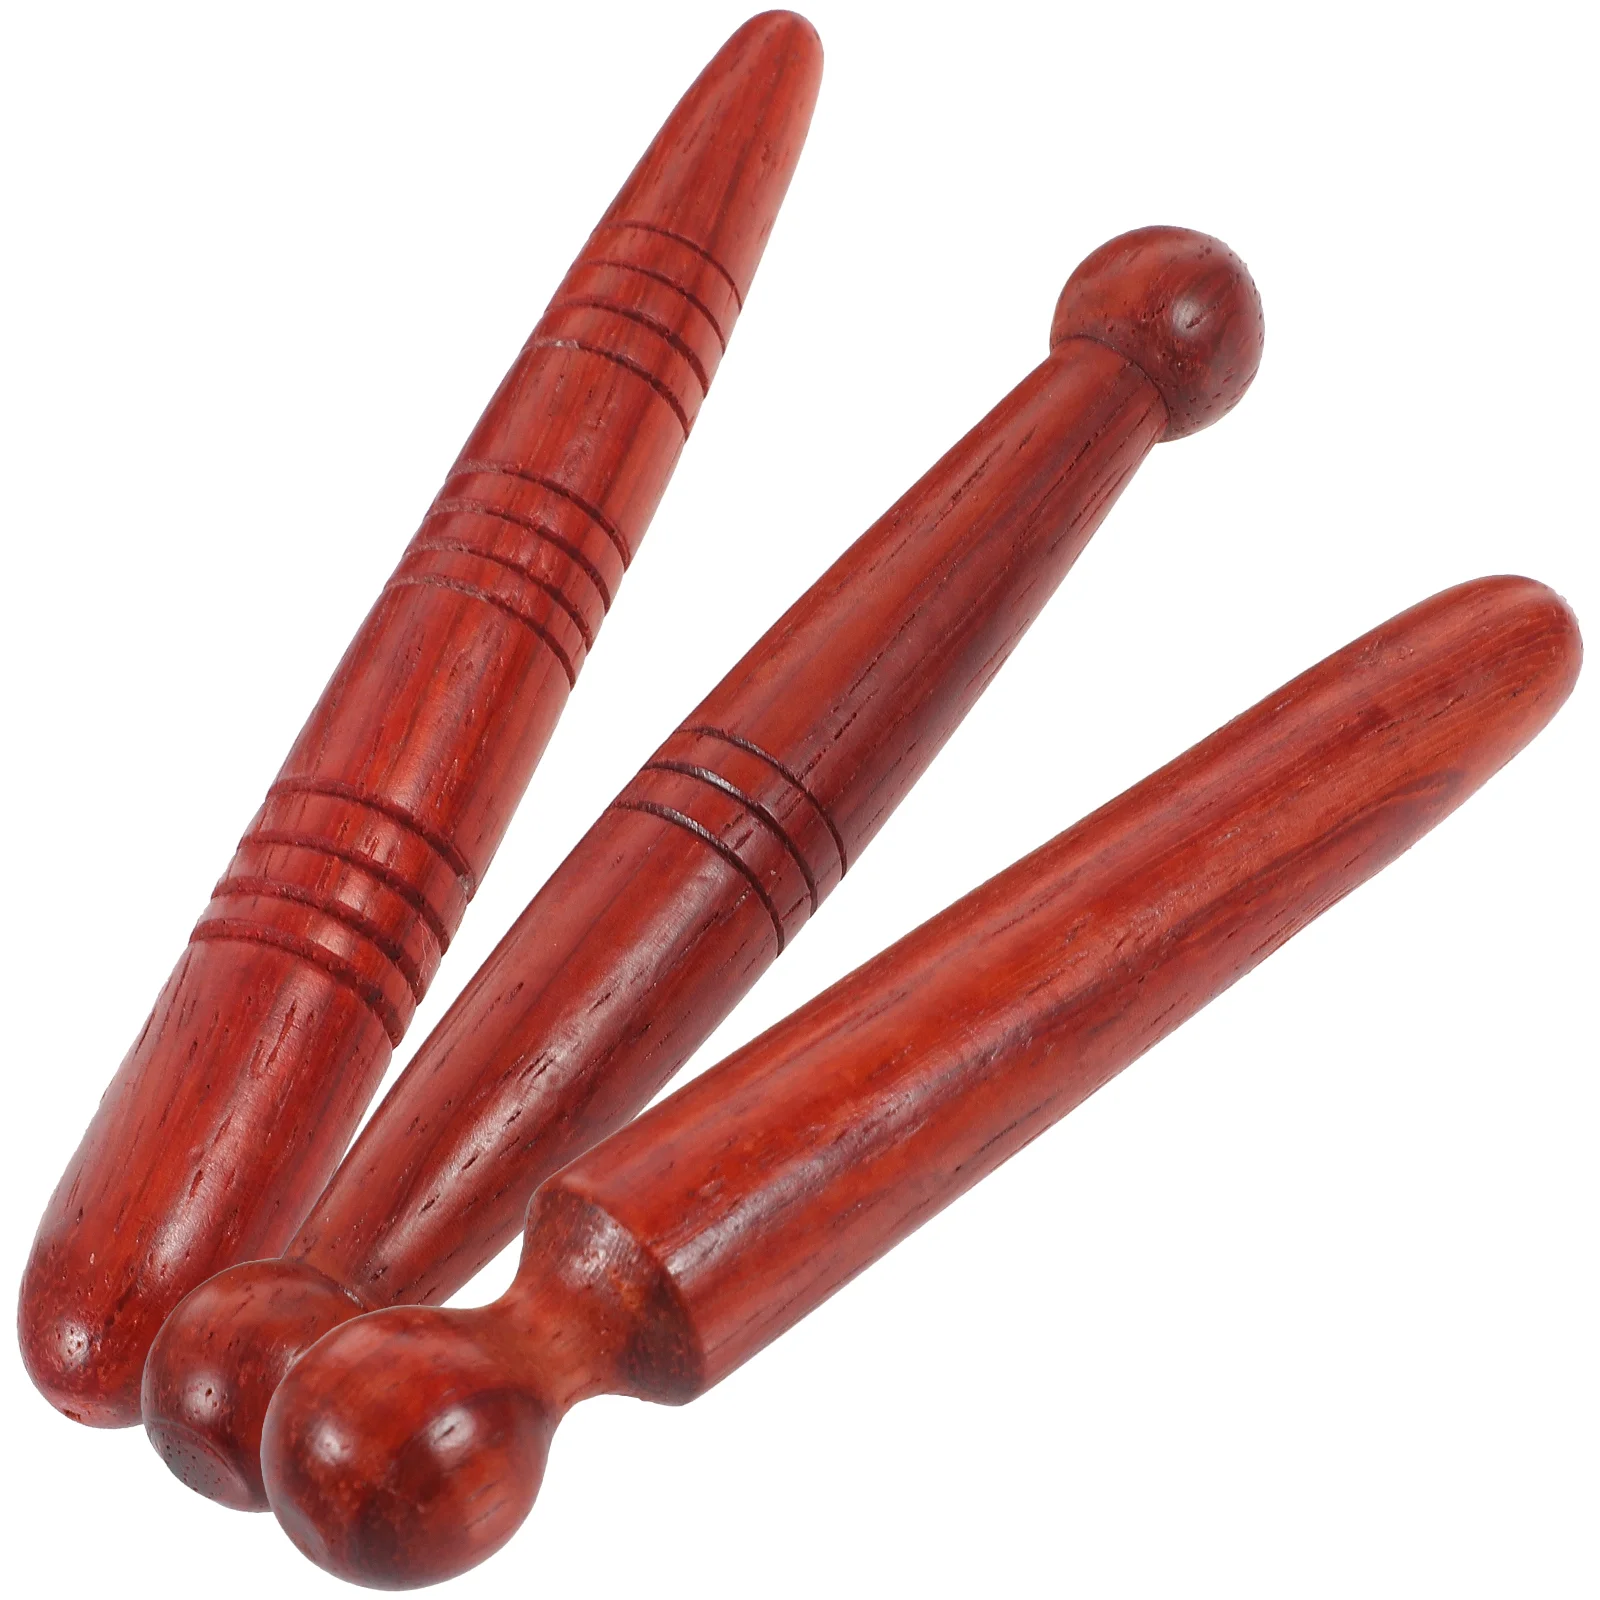 3 Pcs Acupressure Stick Practical Wood Massager Tool Hand Held Foot Tools Massagers Sticks Wooden Point Industrial buttock